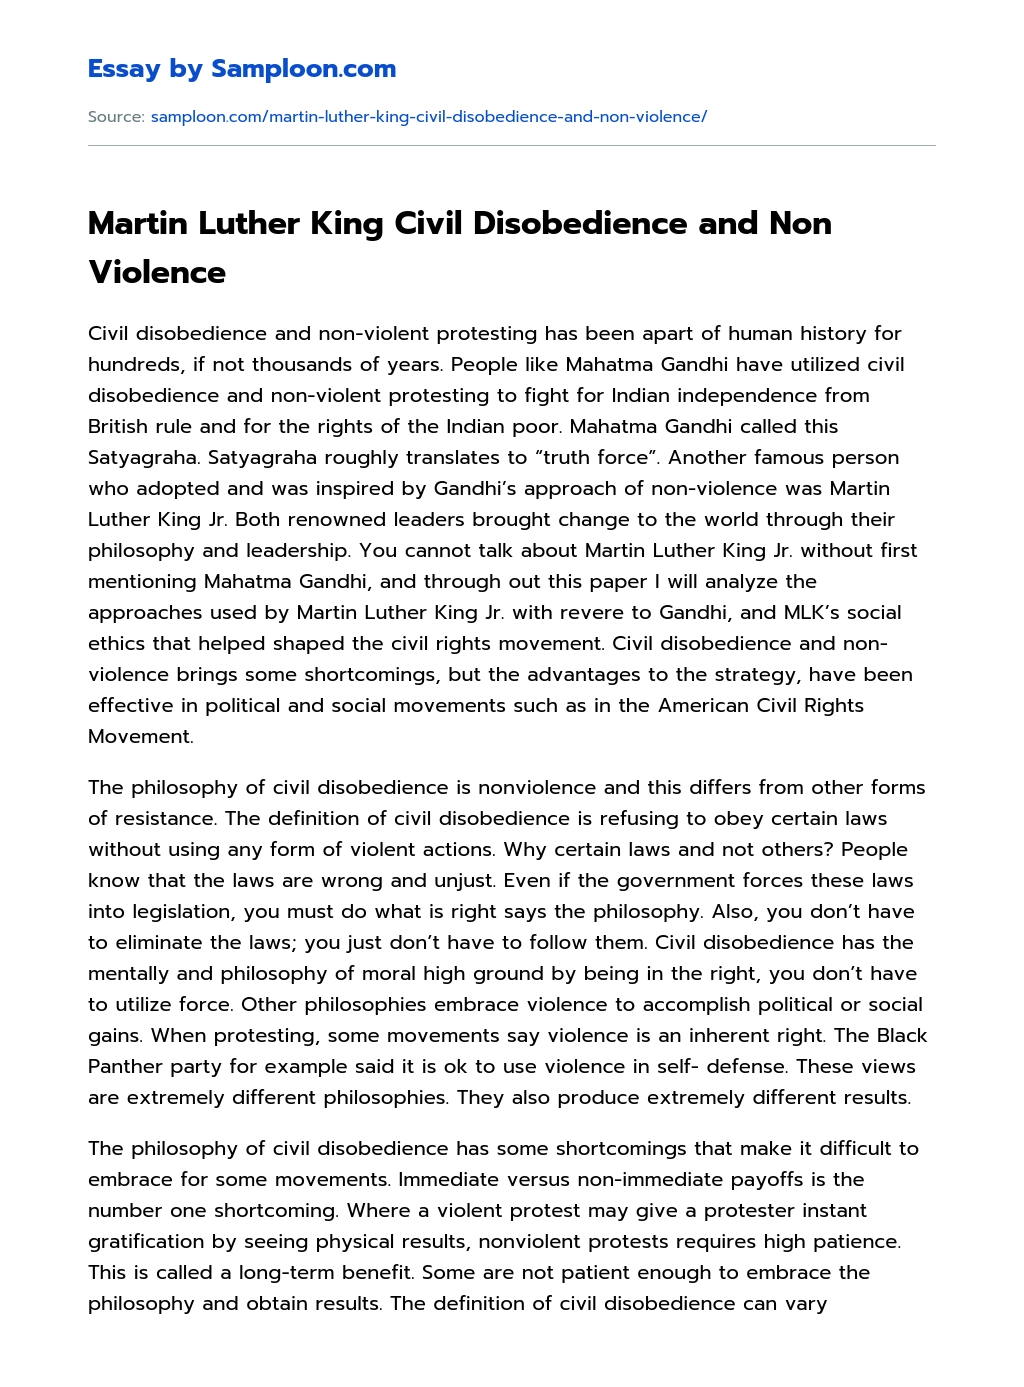 Martin Luther King Civil Disobedience and Non Violence essay